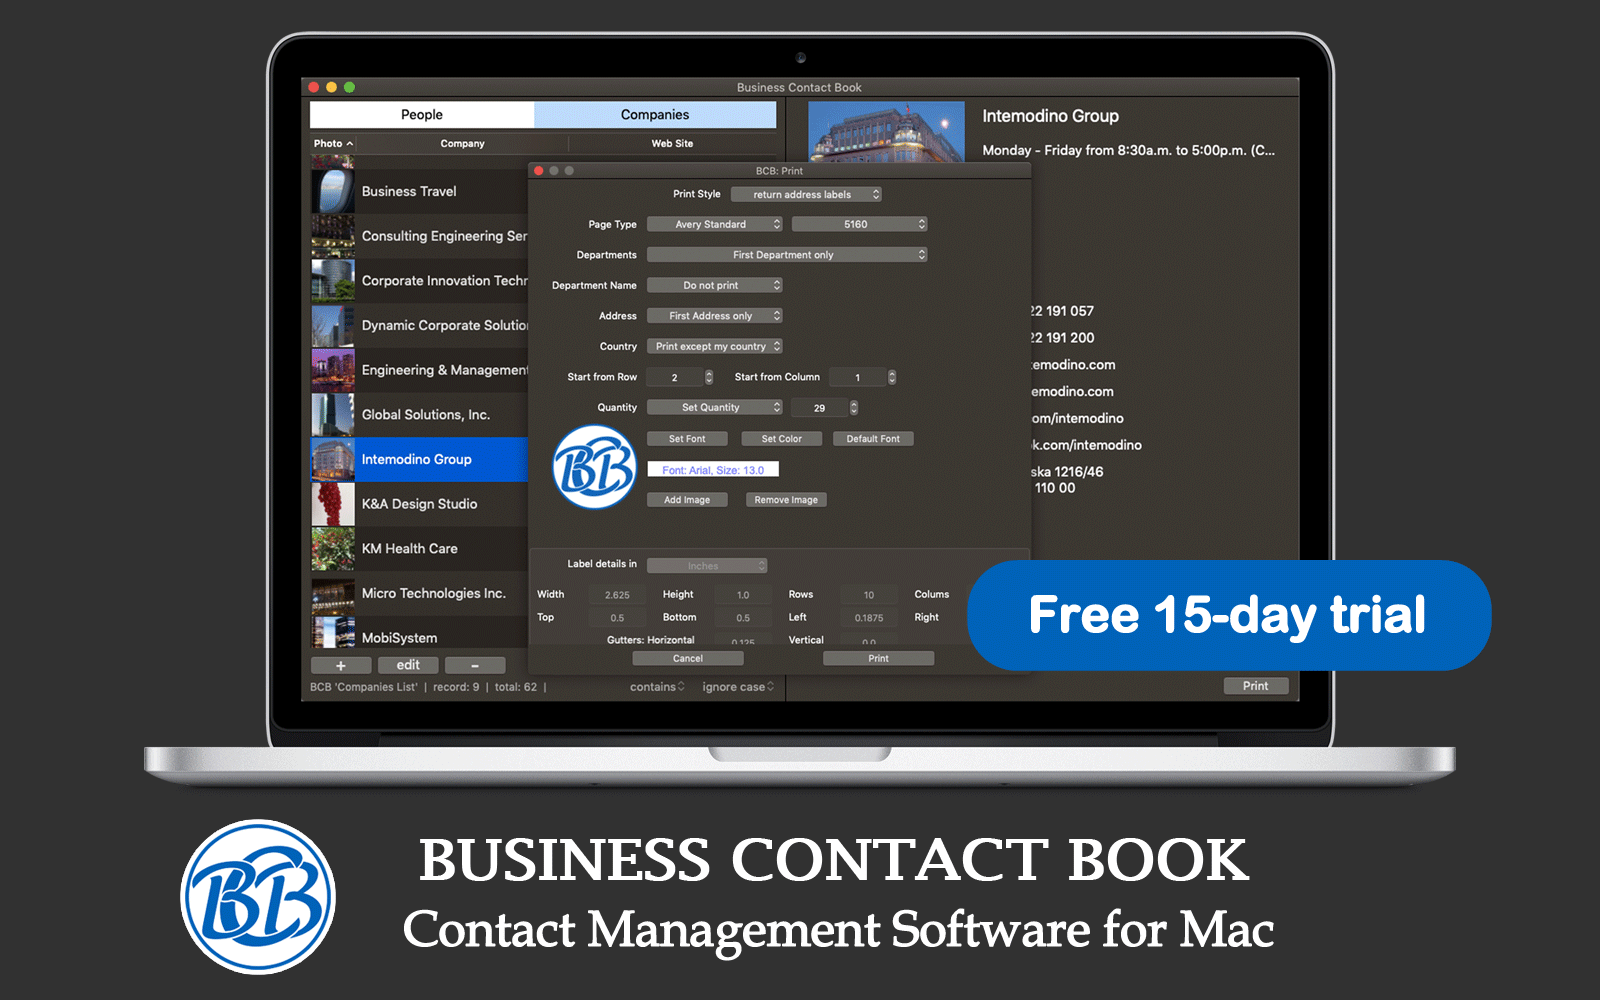 Business Contact Book - New Way in Contact Management